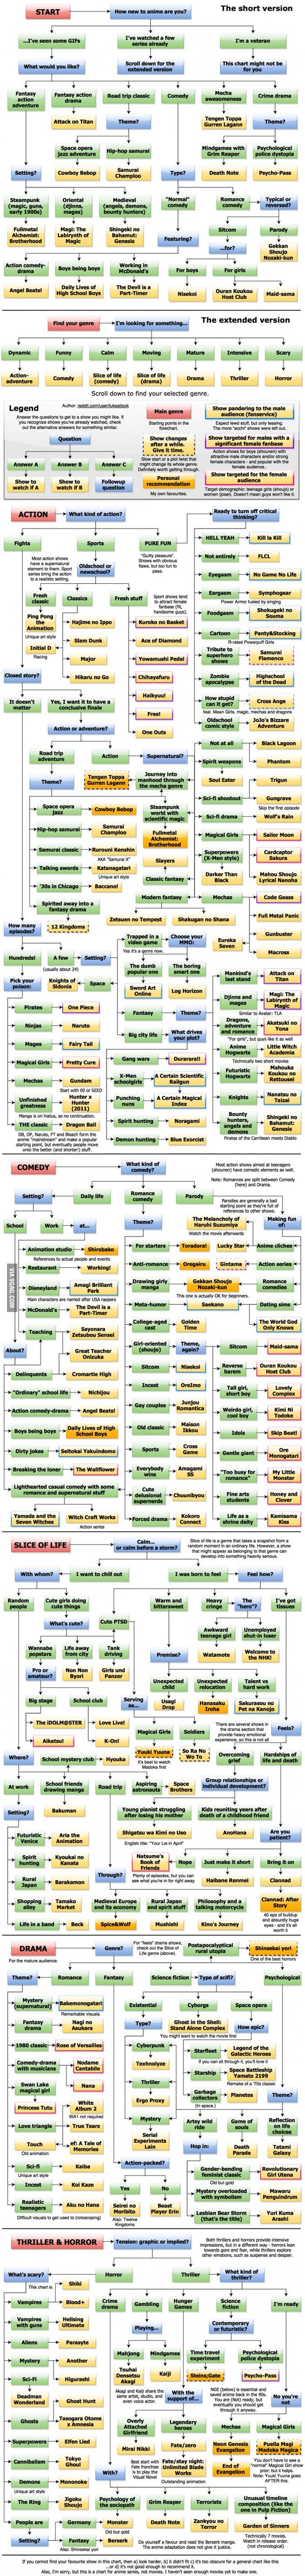 Anime: What to watch flowchart